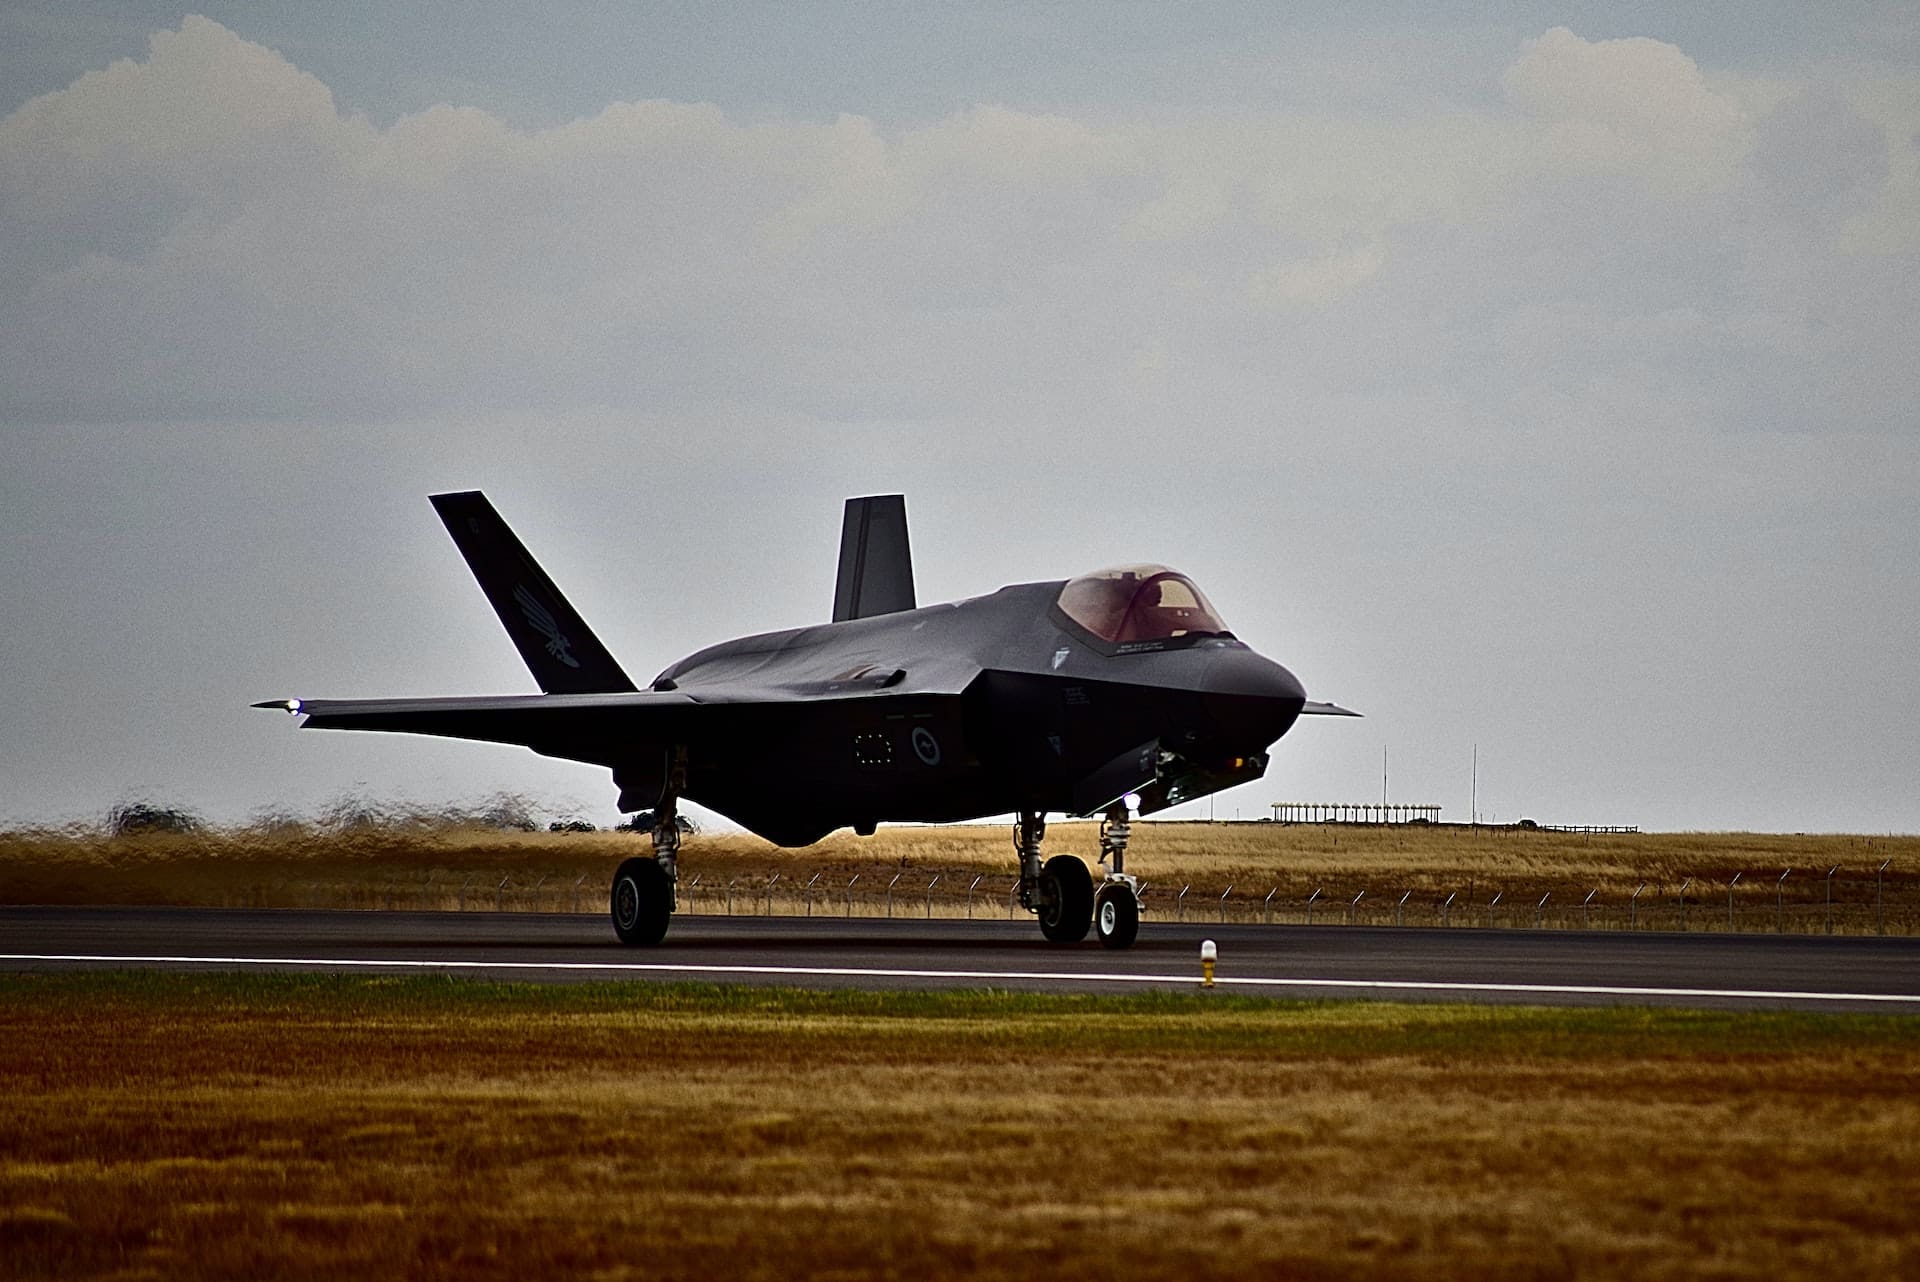 An F35 fighter jet on a runway.